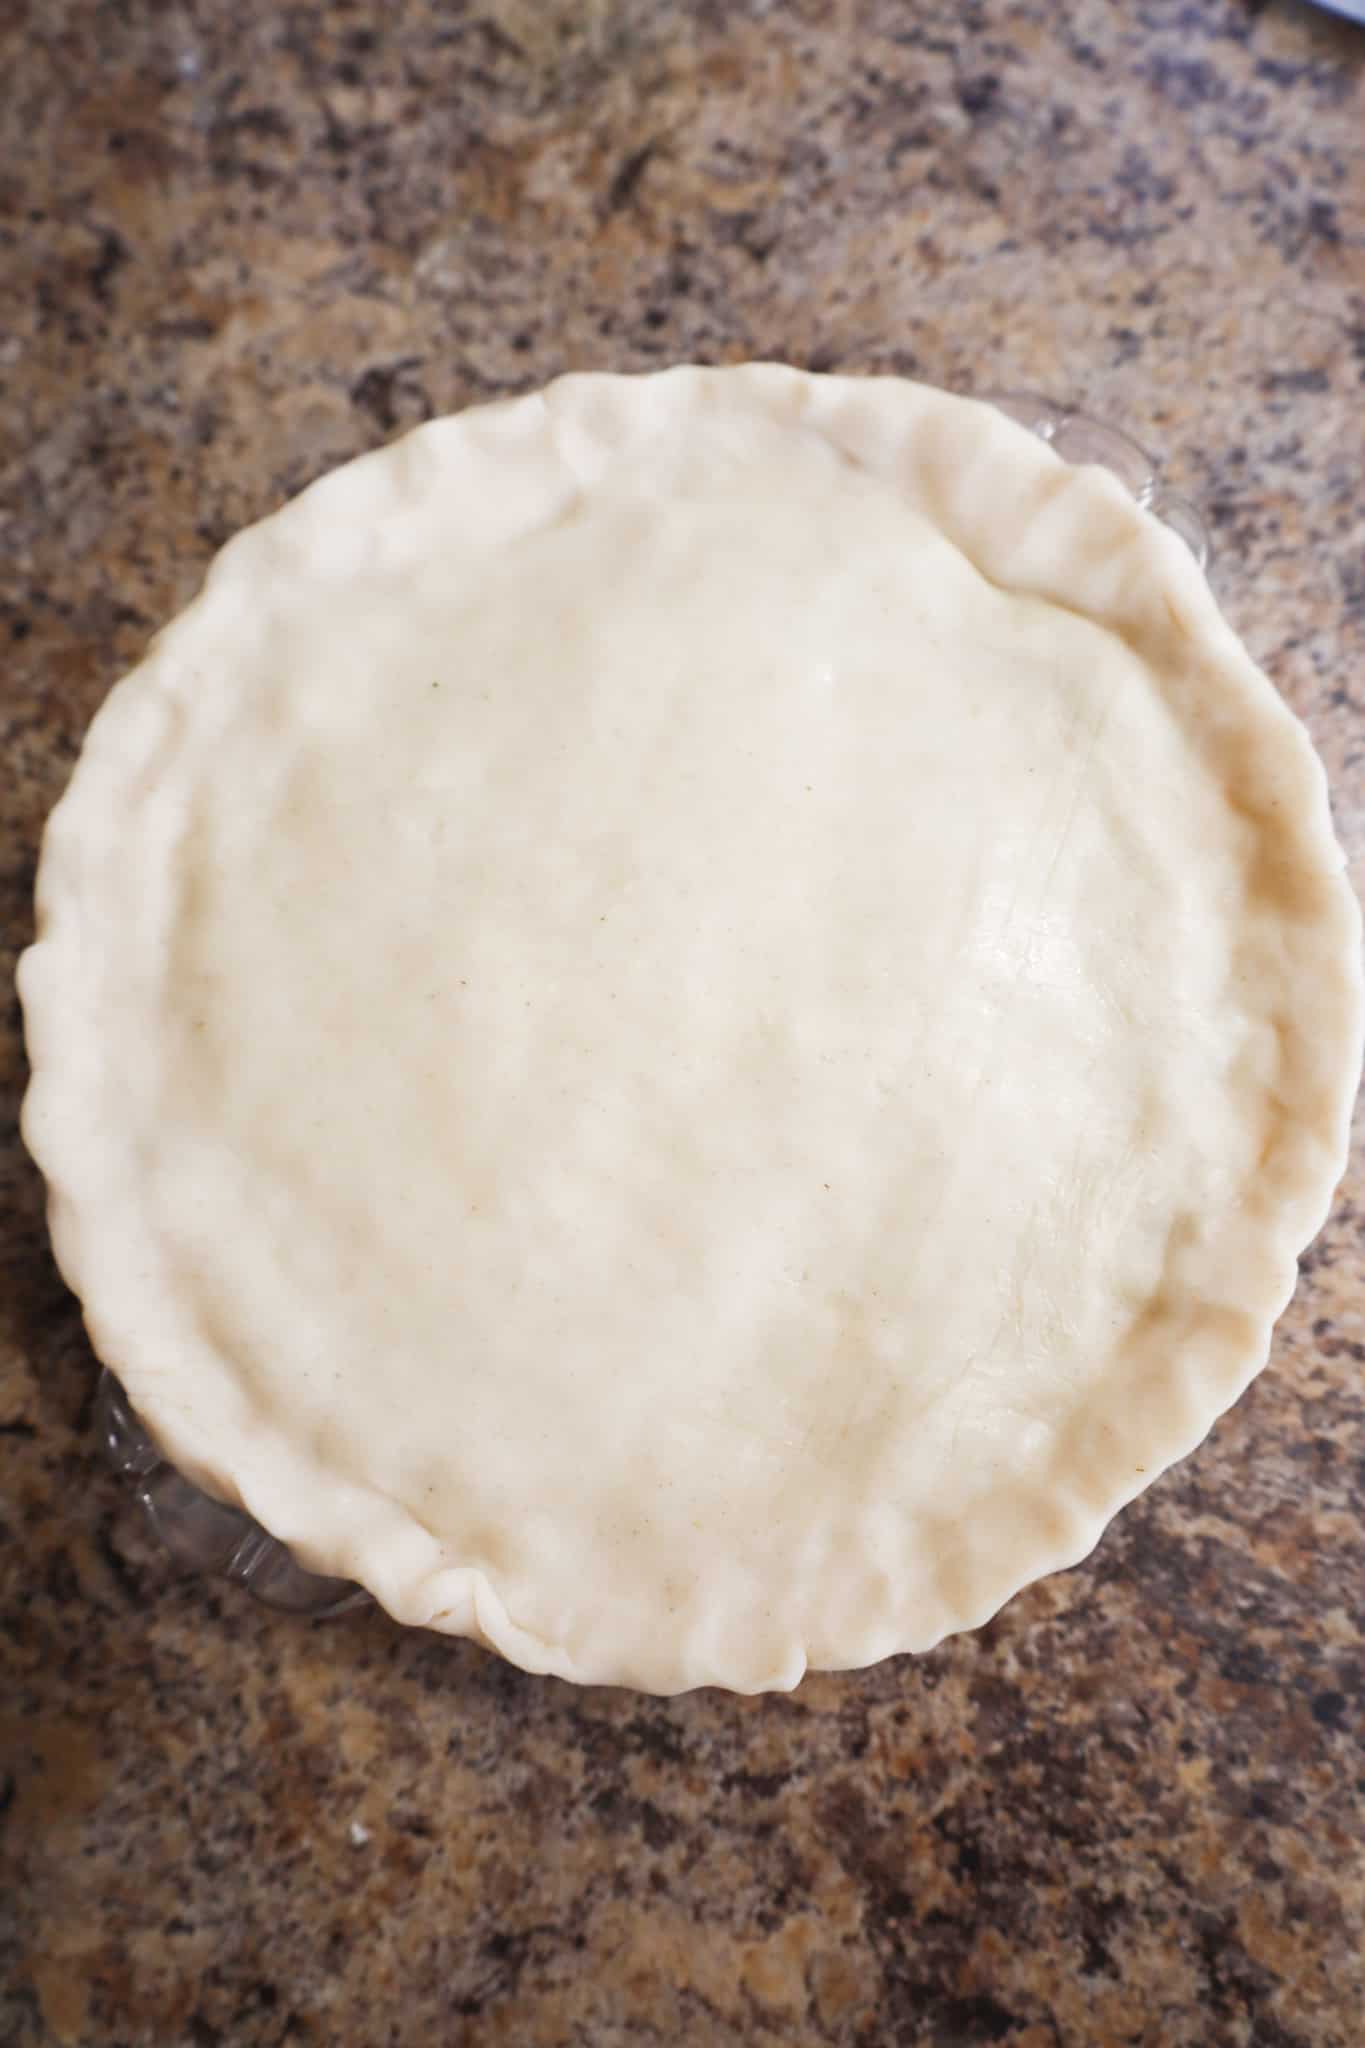 unbaked pie with trimmed crust